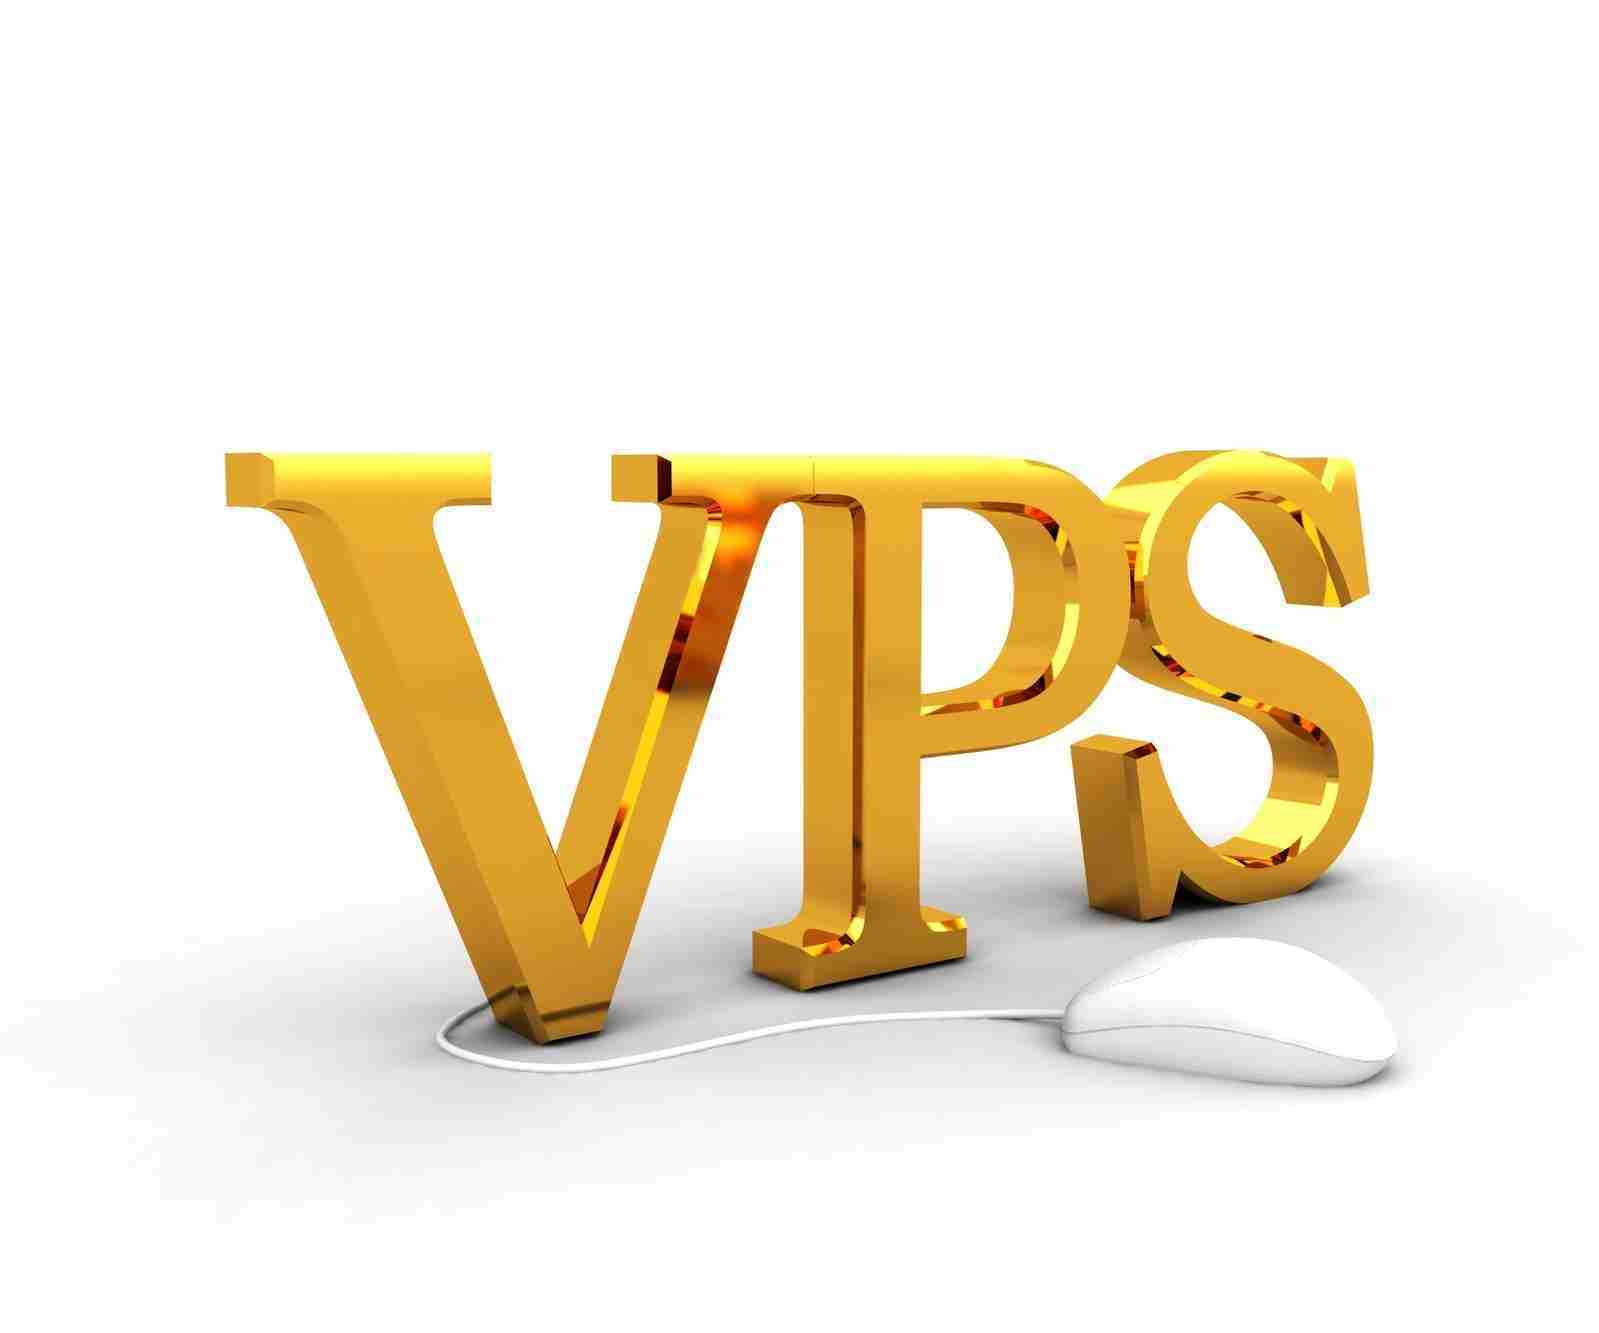 How to make a VPS?